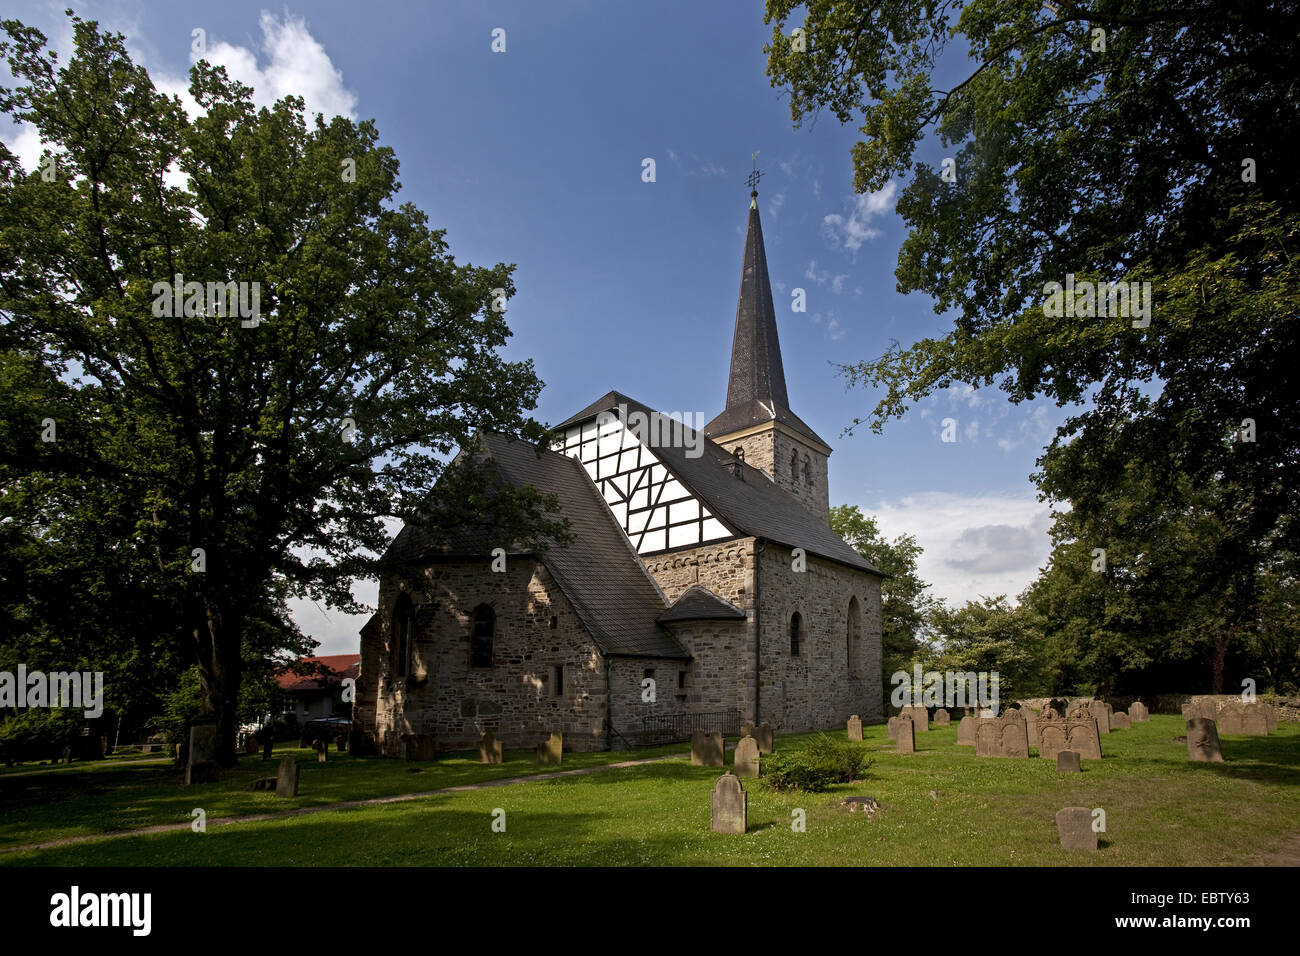 1000 years old church in Stiepel, Stiepeler Dorfkirche, with graves in the foreground, Germany, North Rhine-Westphalia, Ruhr Area, Bochum Stock Photo